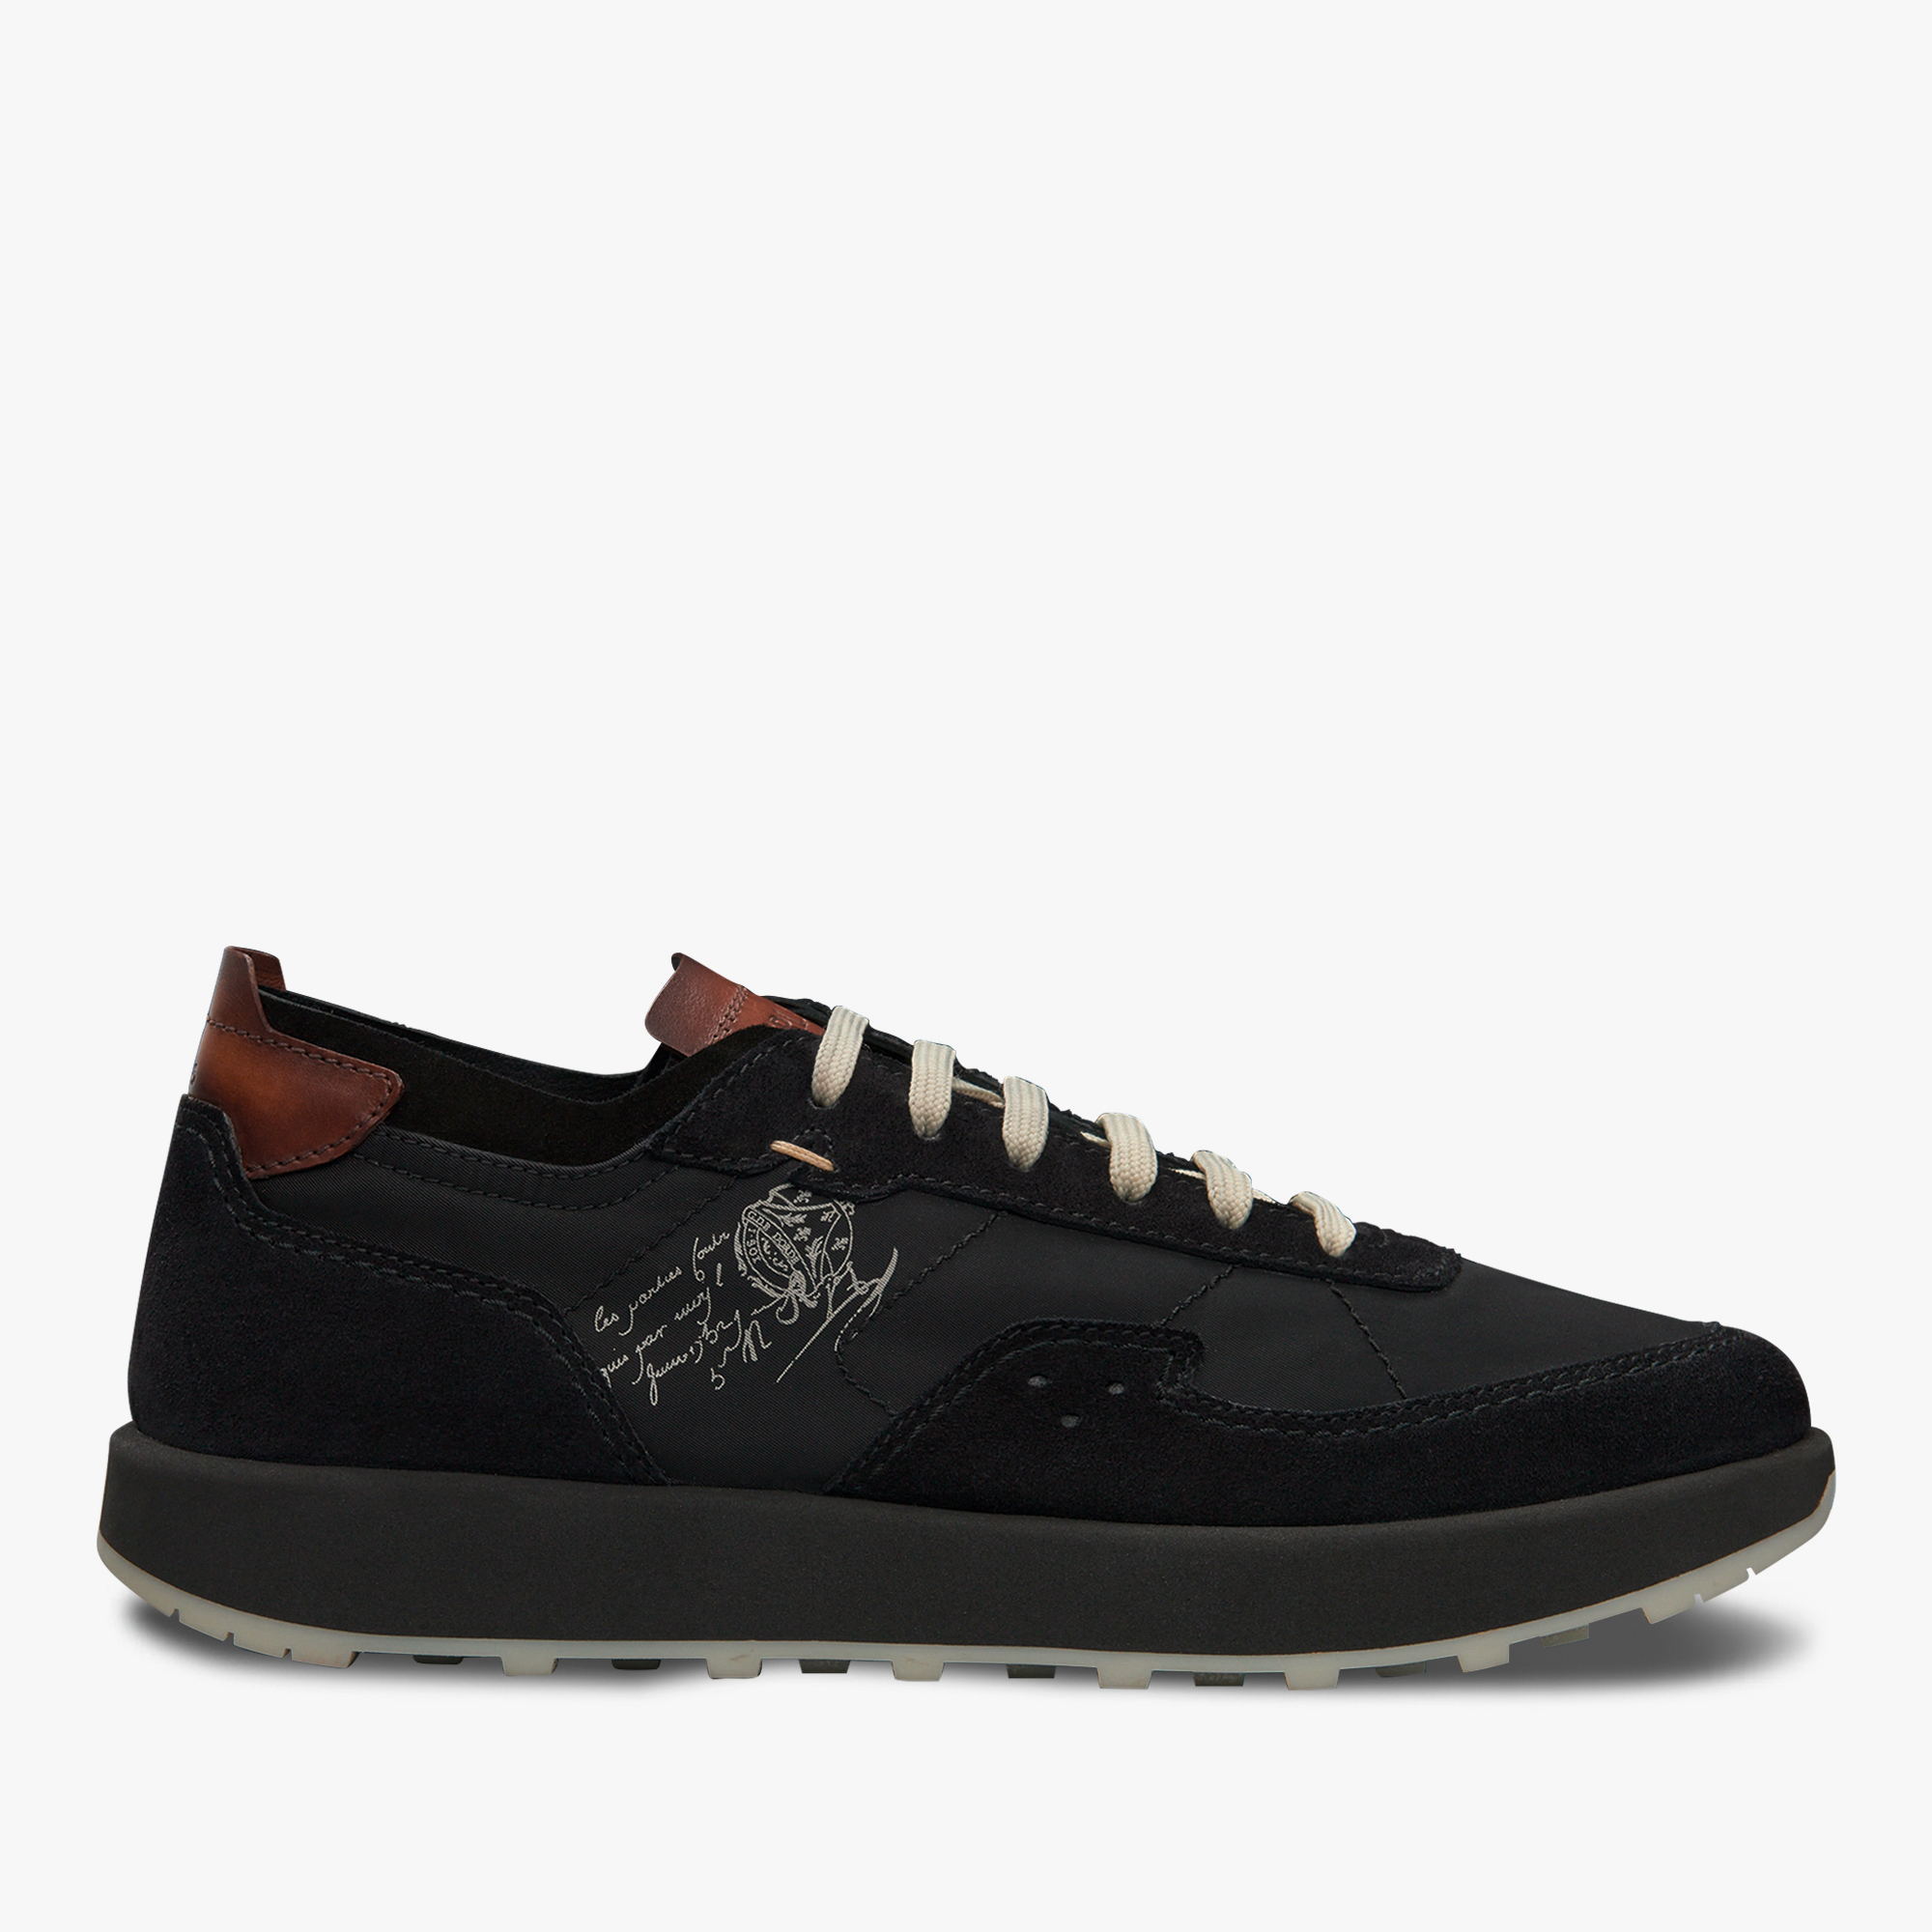 Light Track Suede Leather and Nylon Sneaker, BLACK, hi-res